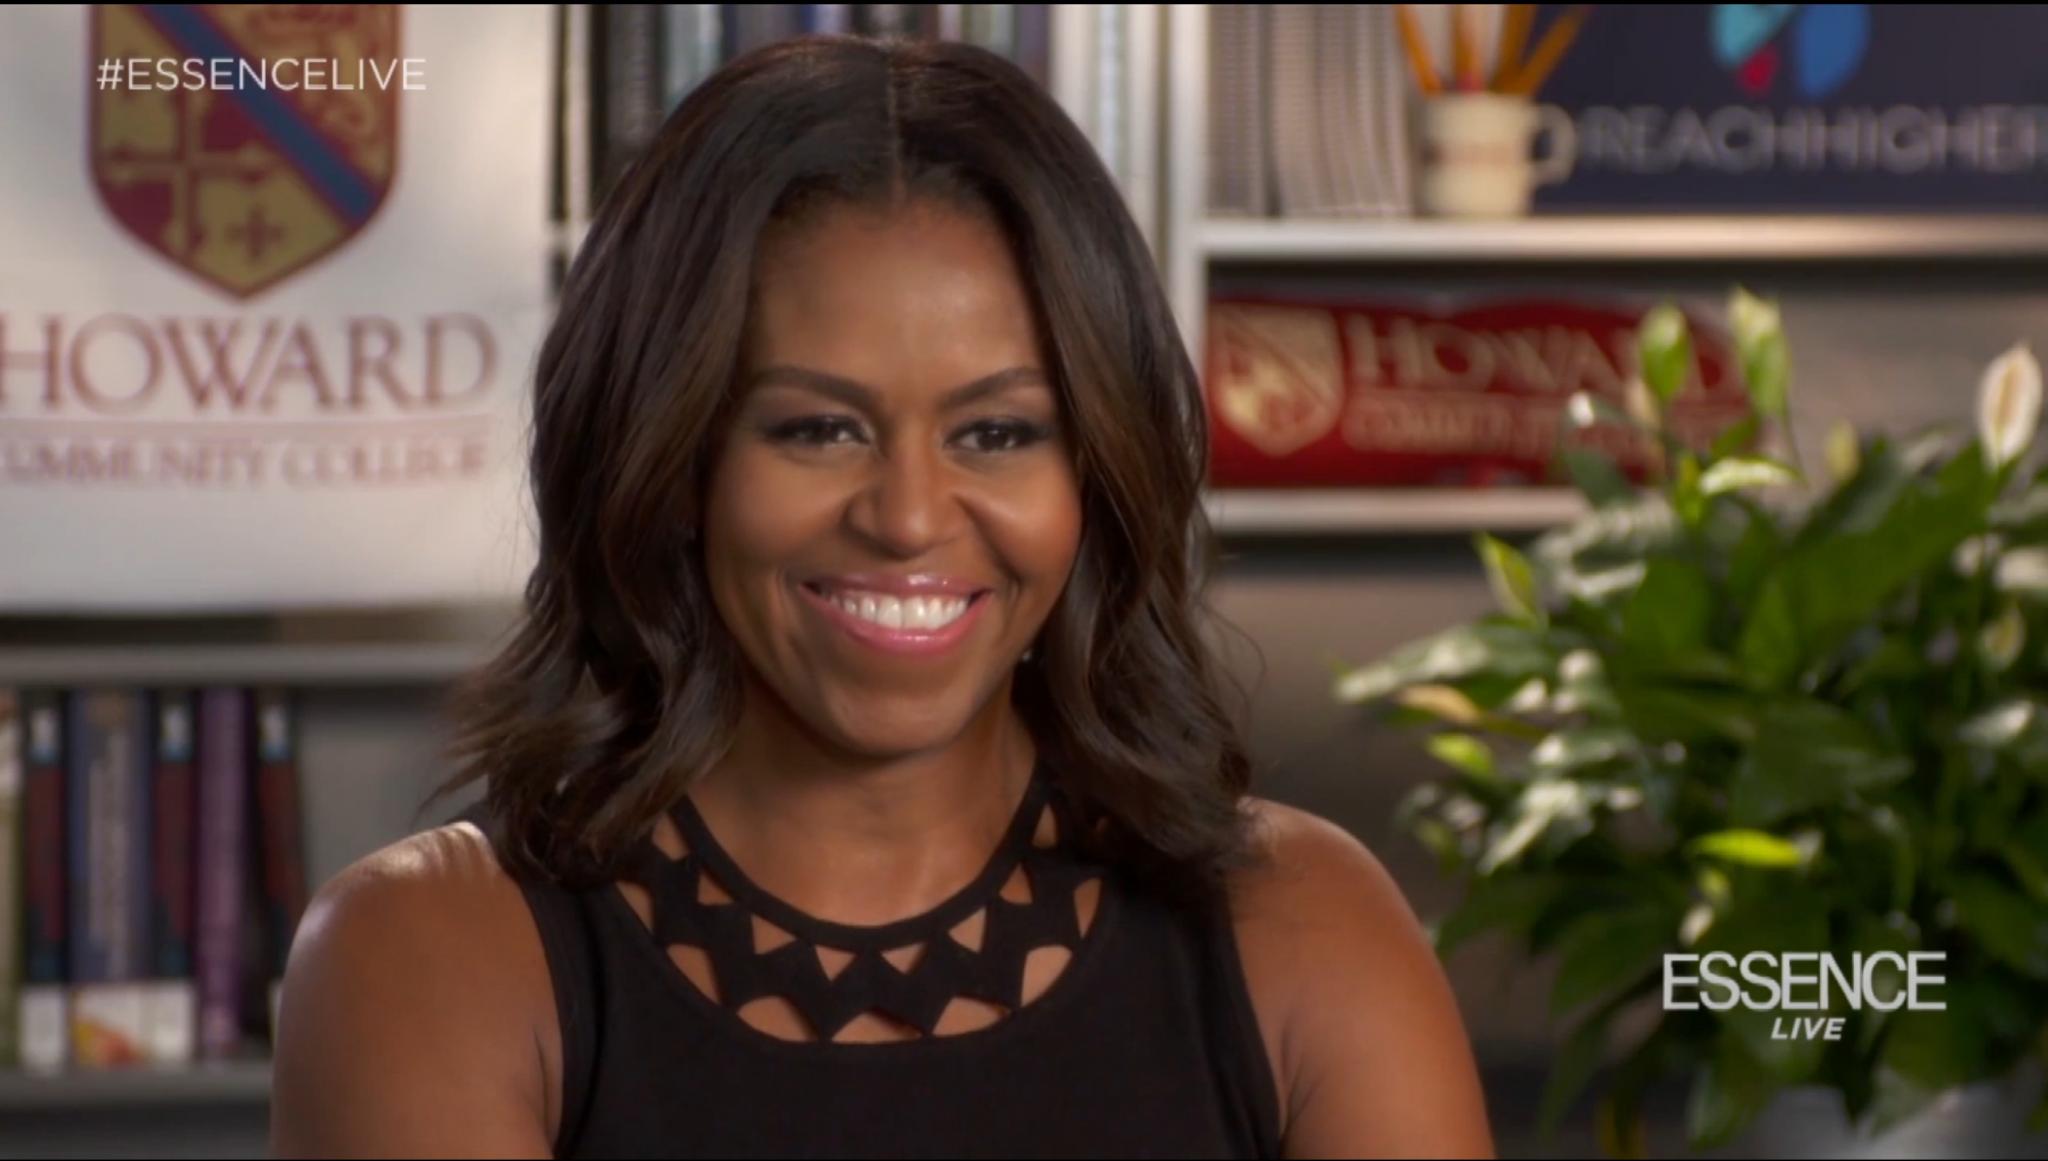 ESSENCE Talks to Michelle Obama About Getting More Kids to College
